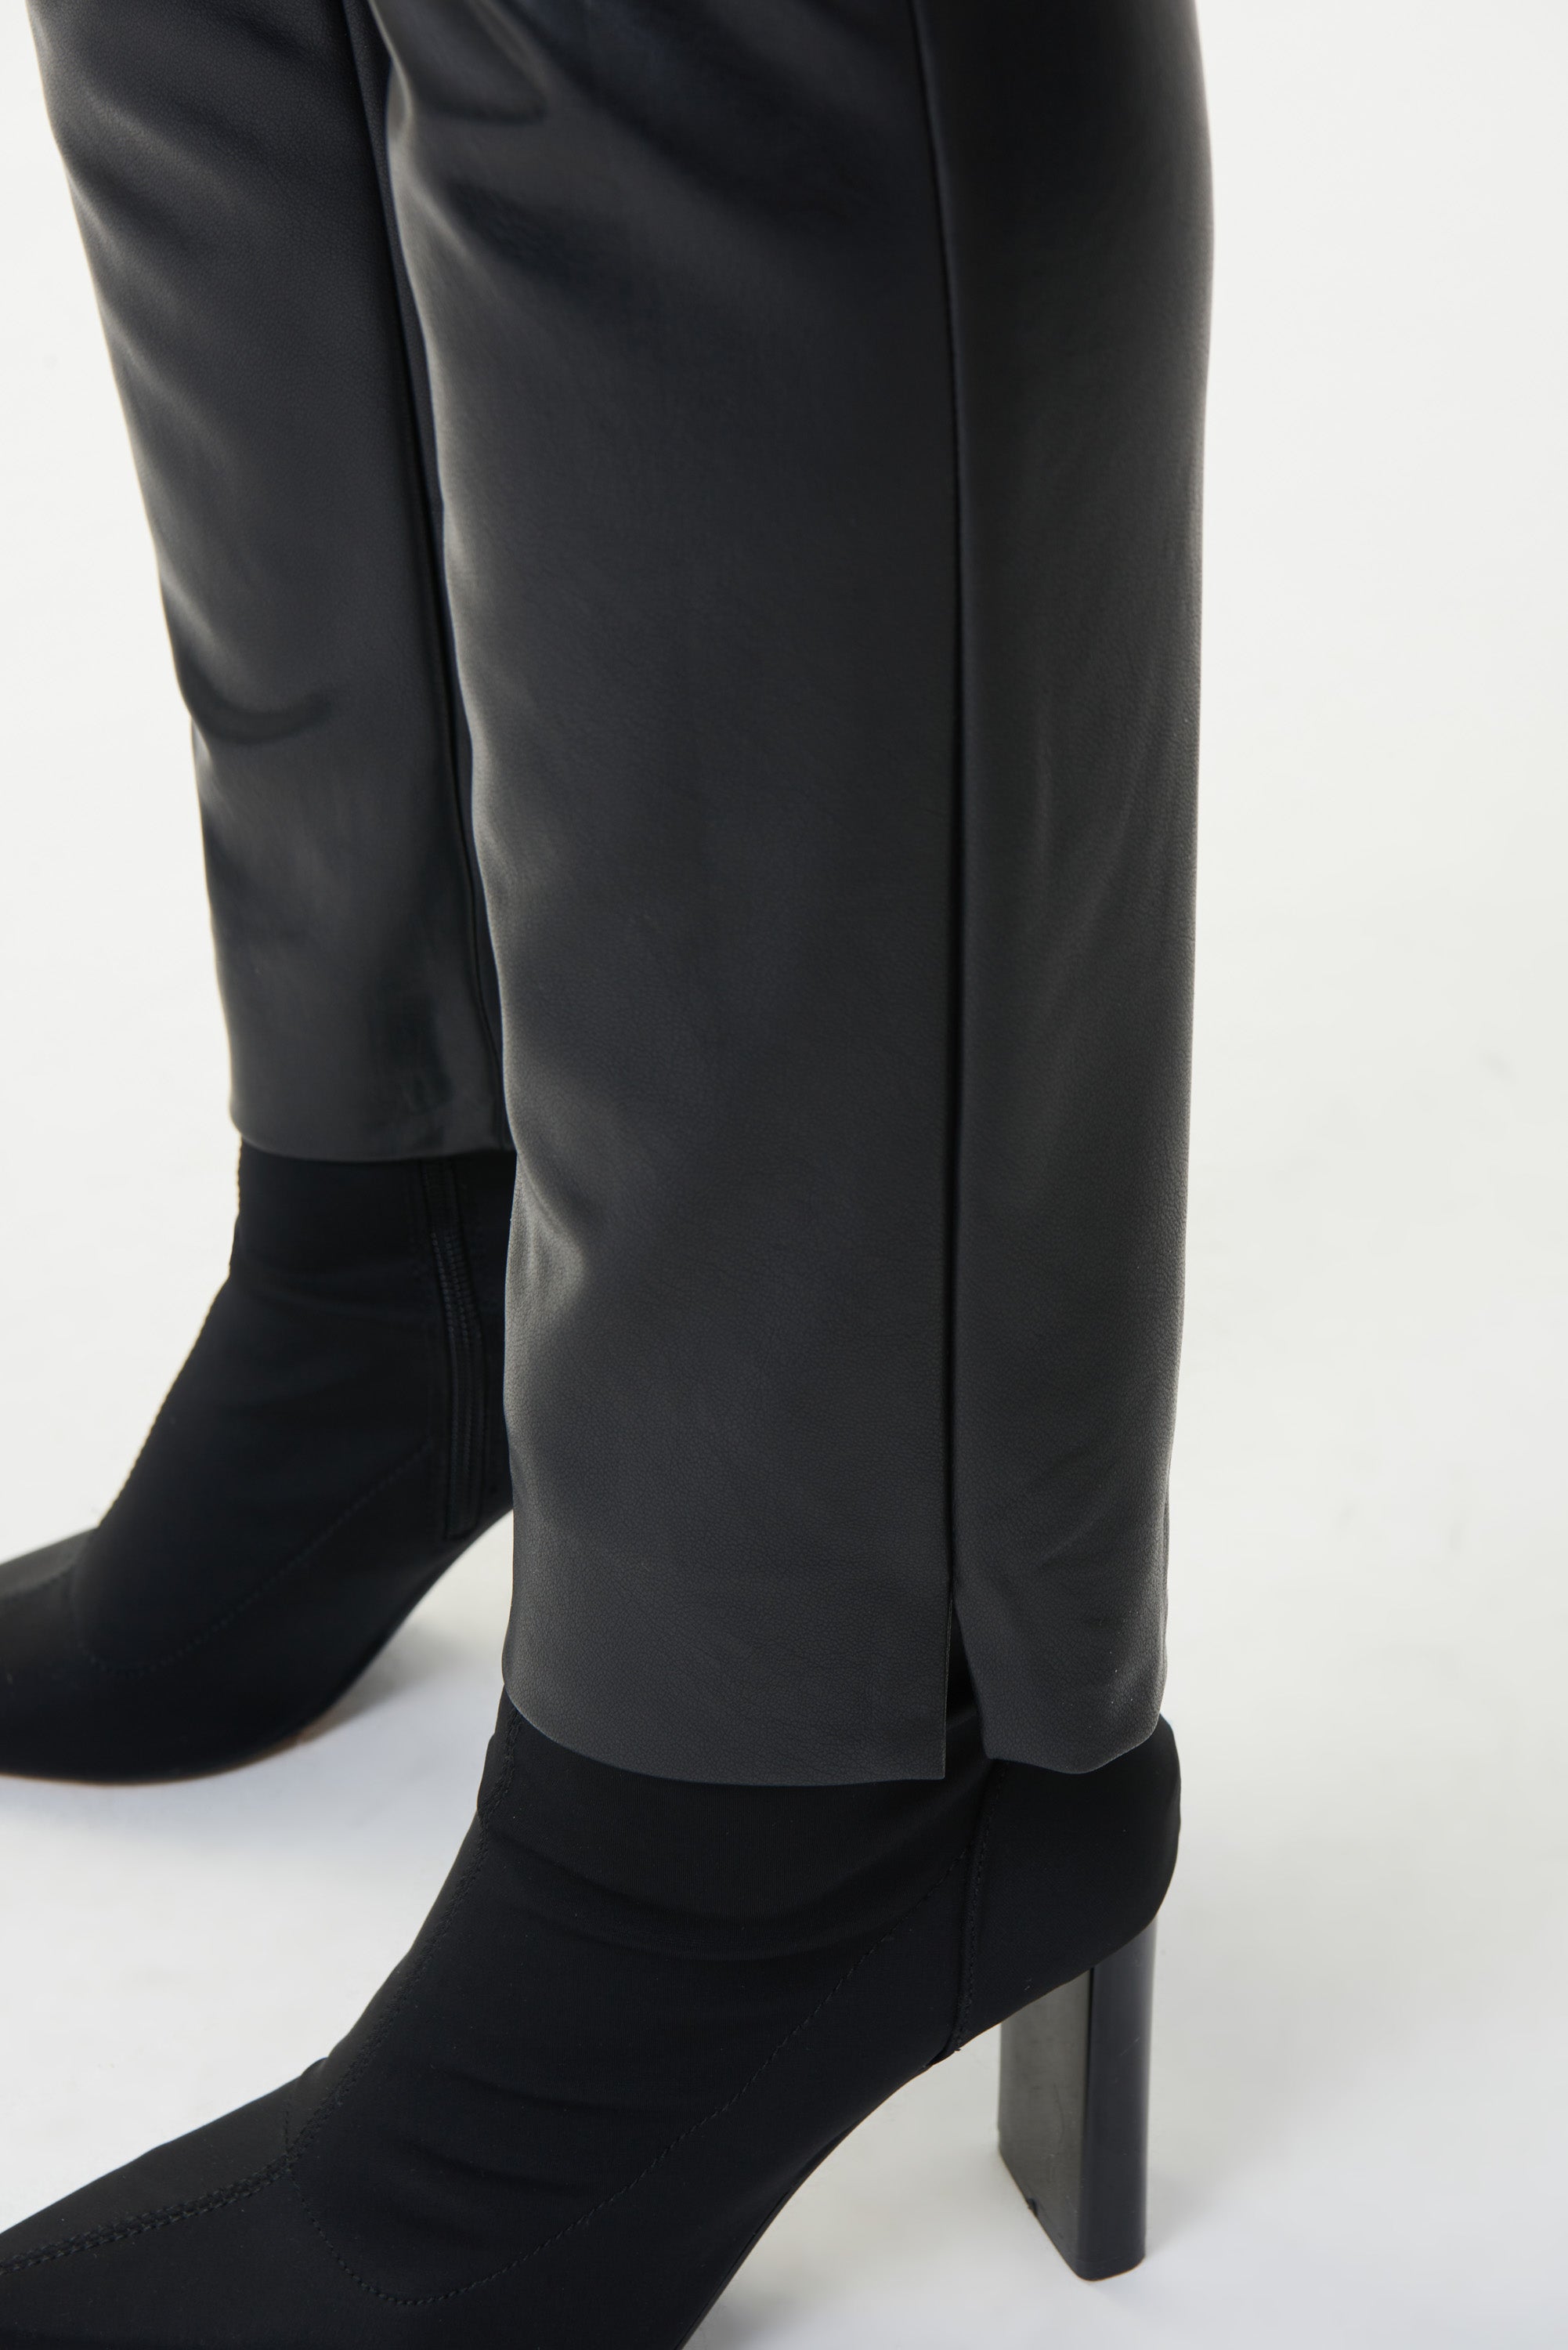 These Joseph Ribkoff Pleather Dress Pants are a chic choice for work or play. These pull on, slim fit, high rise pants feature a  2.5 inch waistband that stays securely in place, a metal Joseph Ribkoff signature tag at the hip and notched ankle to show off your shoes.